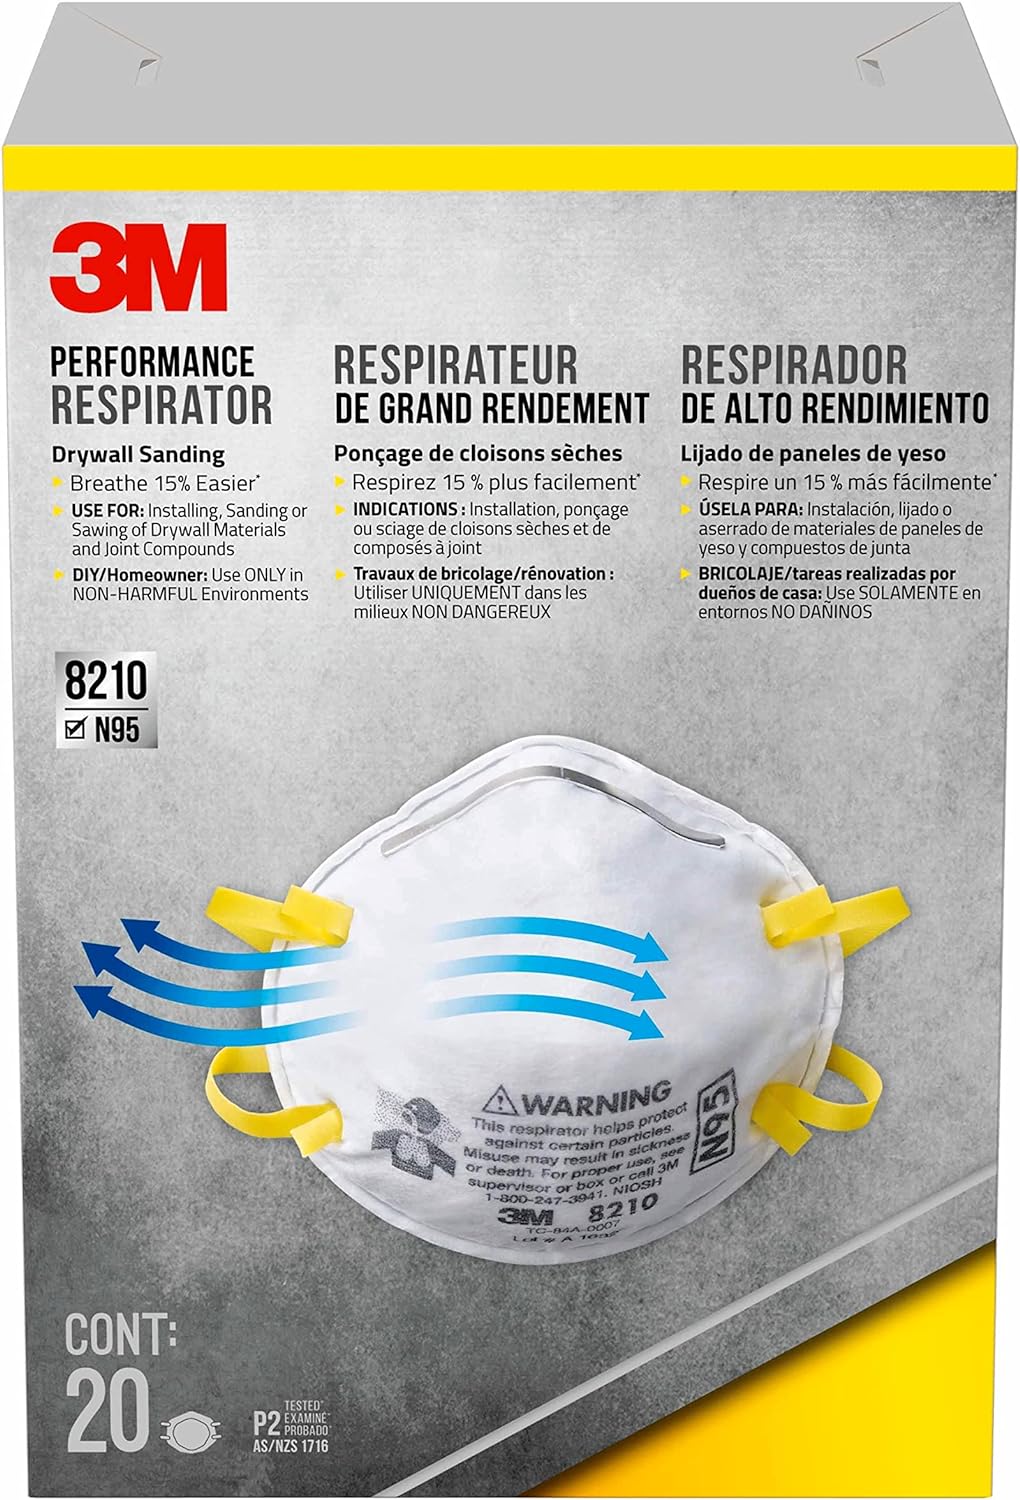 3M N95 Performance Respirator 8210, 20 Pack, Drywall Sanding, NIOSH-APPROVED N95, Advanced Filter Media For Easy Breathing, Cushioning Nose Foam, Adjustable Noseclip, Stretchable Straps (8210D20-DC)